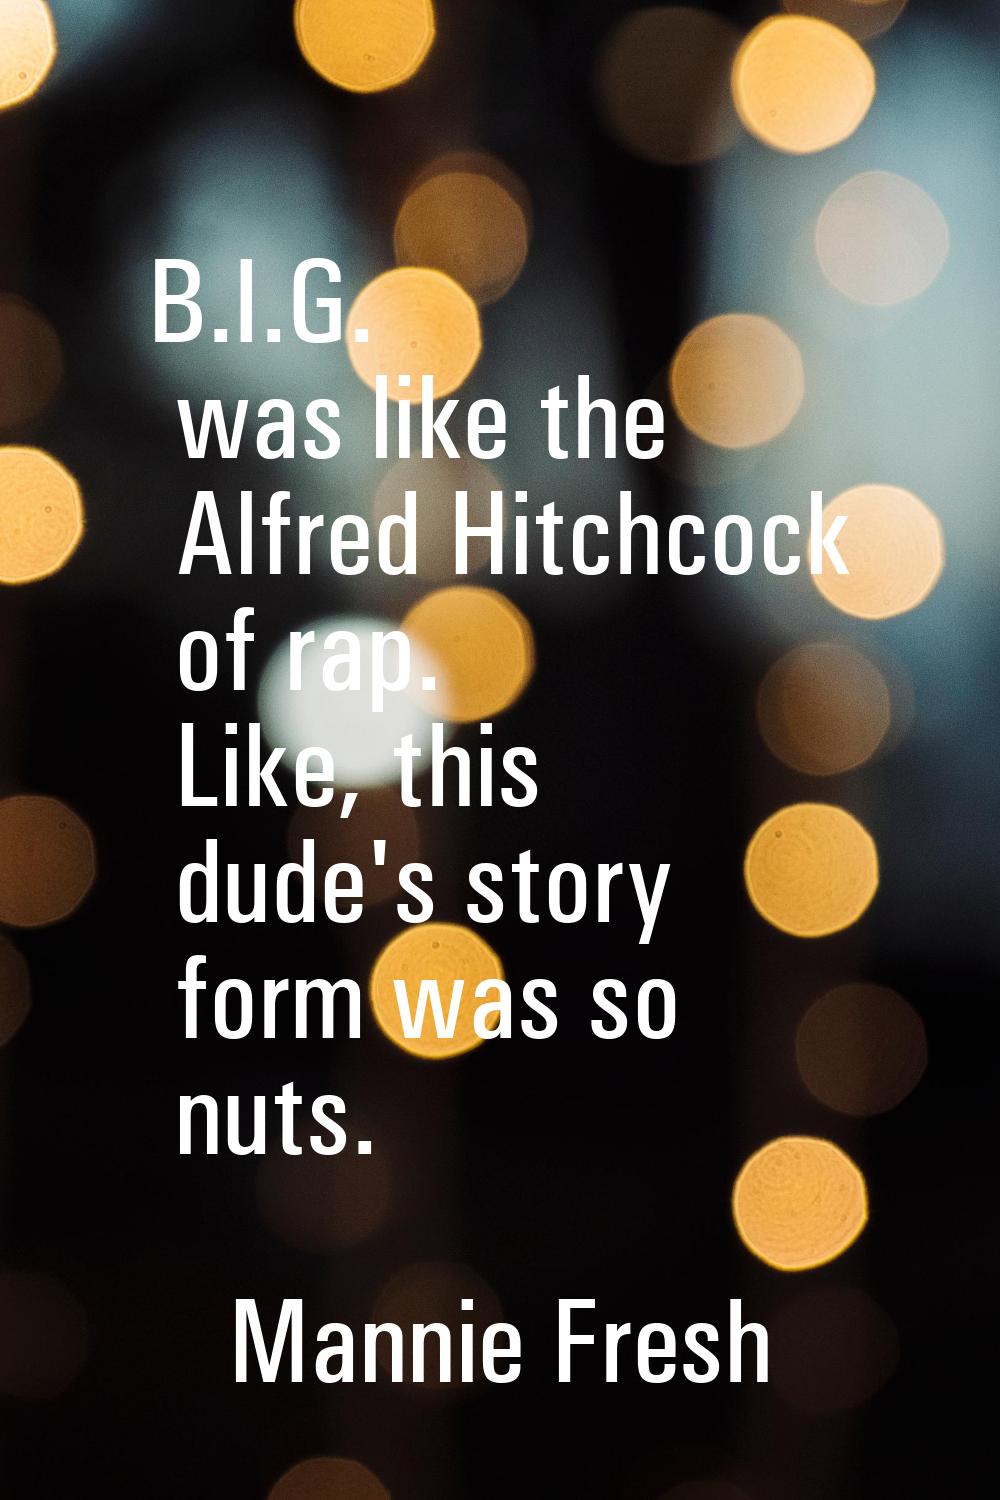 B.I.G. was like the Alfred Hitchcock of rap. Like, this dude's story form was so nuts.